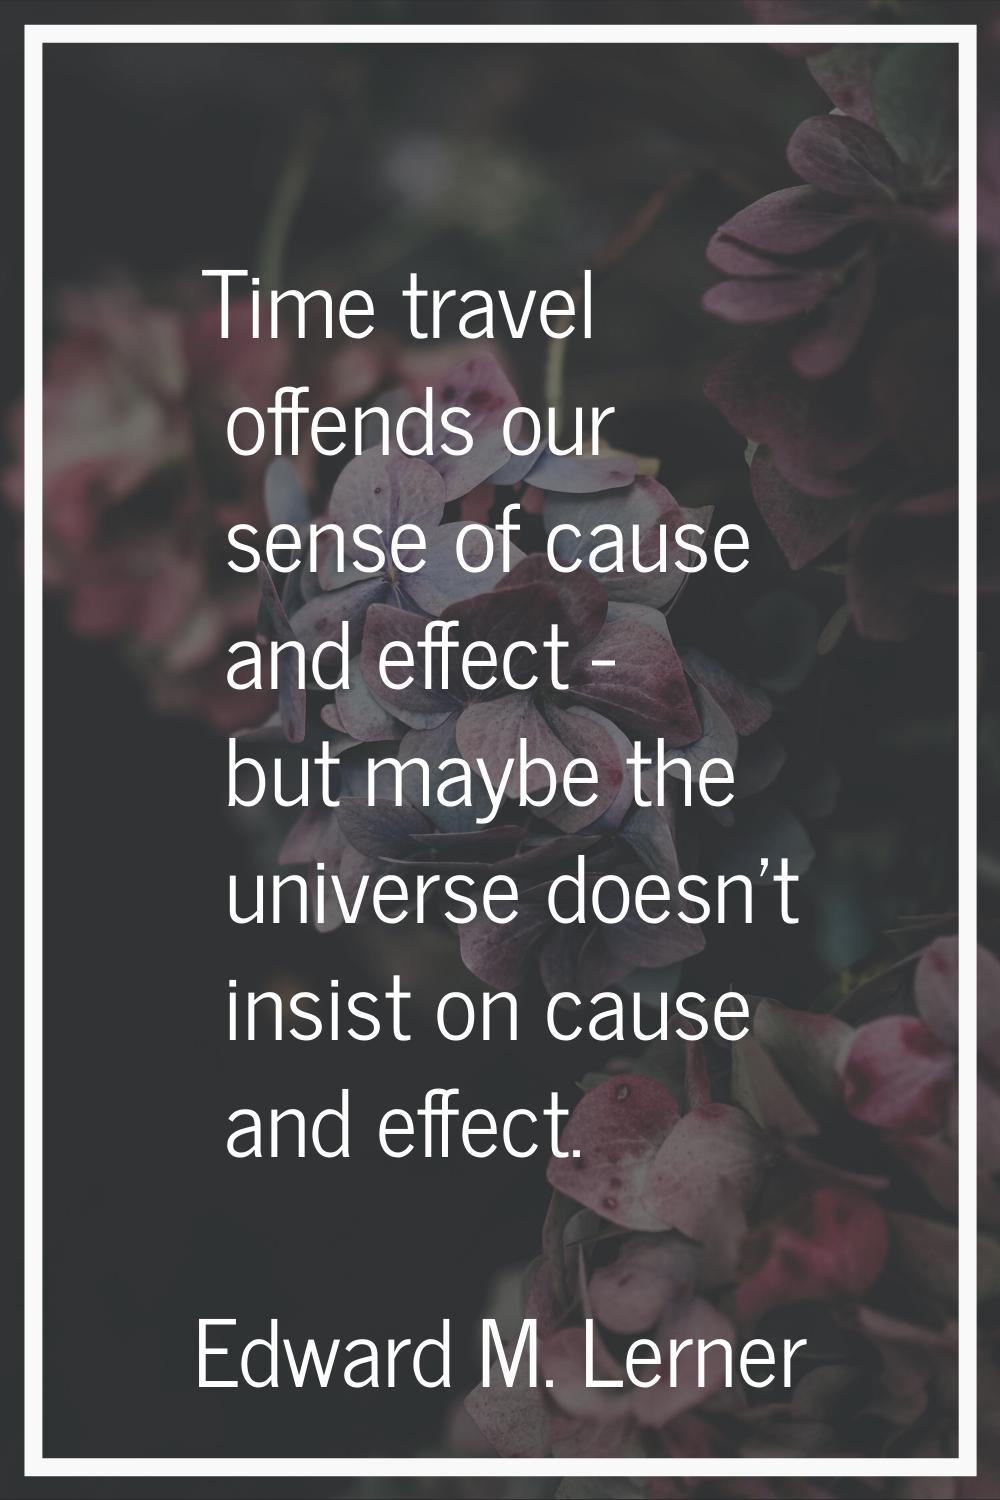 Time travel offends our sense of cause and effect - but maybe the universe doesn't insist on cause 